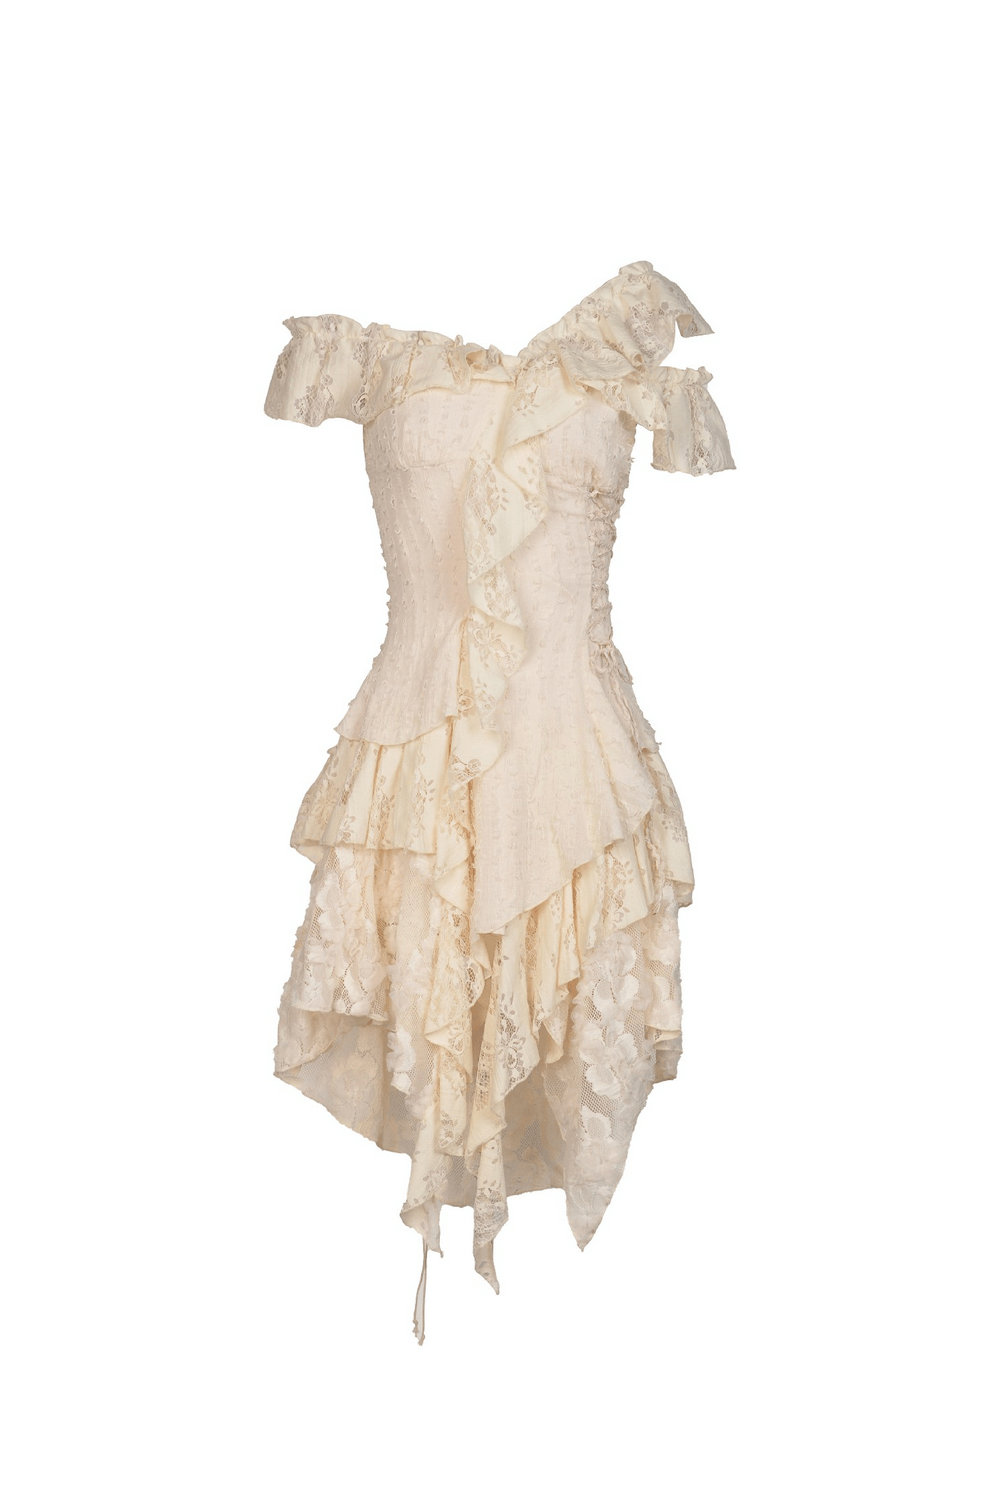 Vintage Lace Layered Dress with Ruffled Detailing